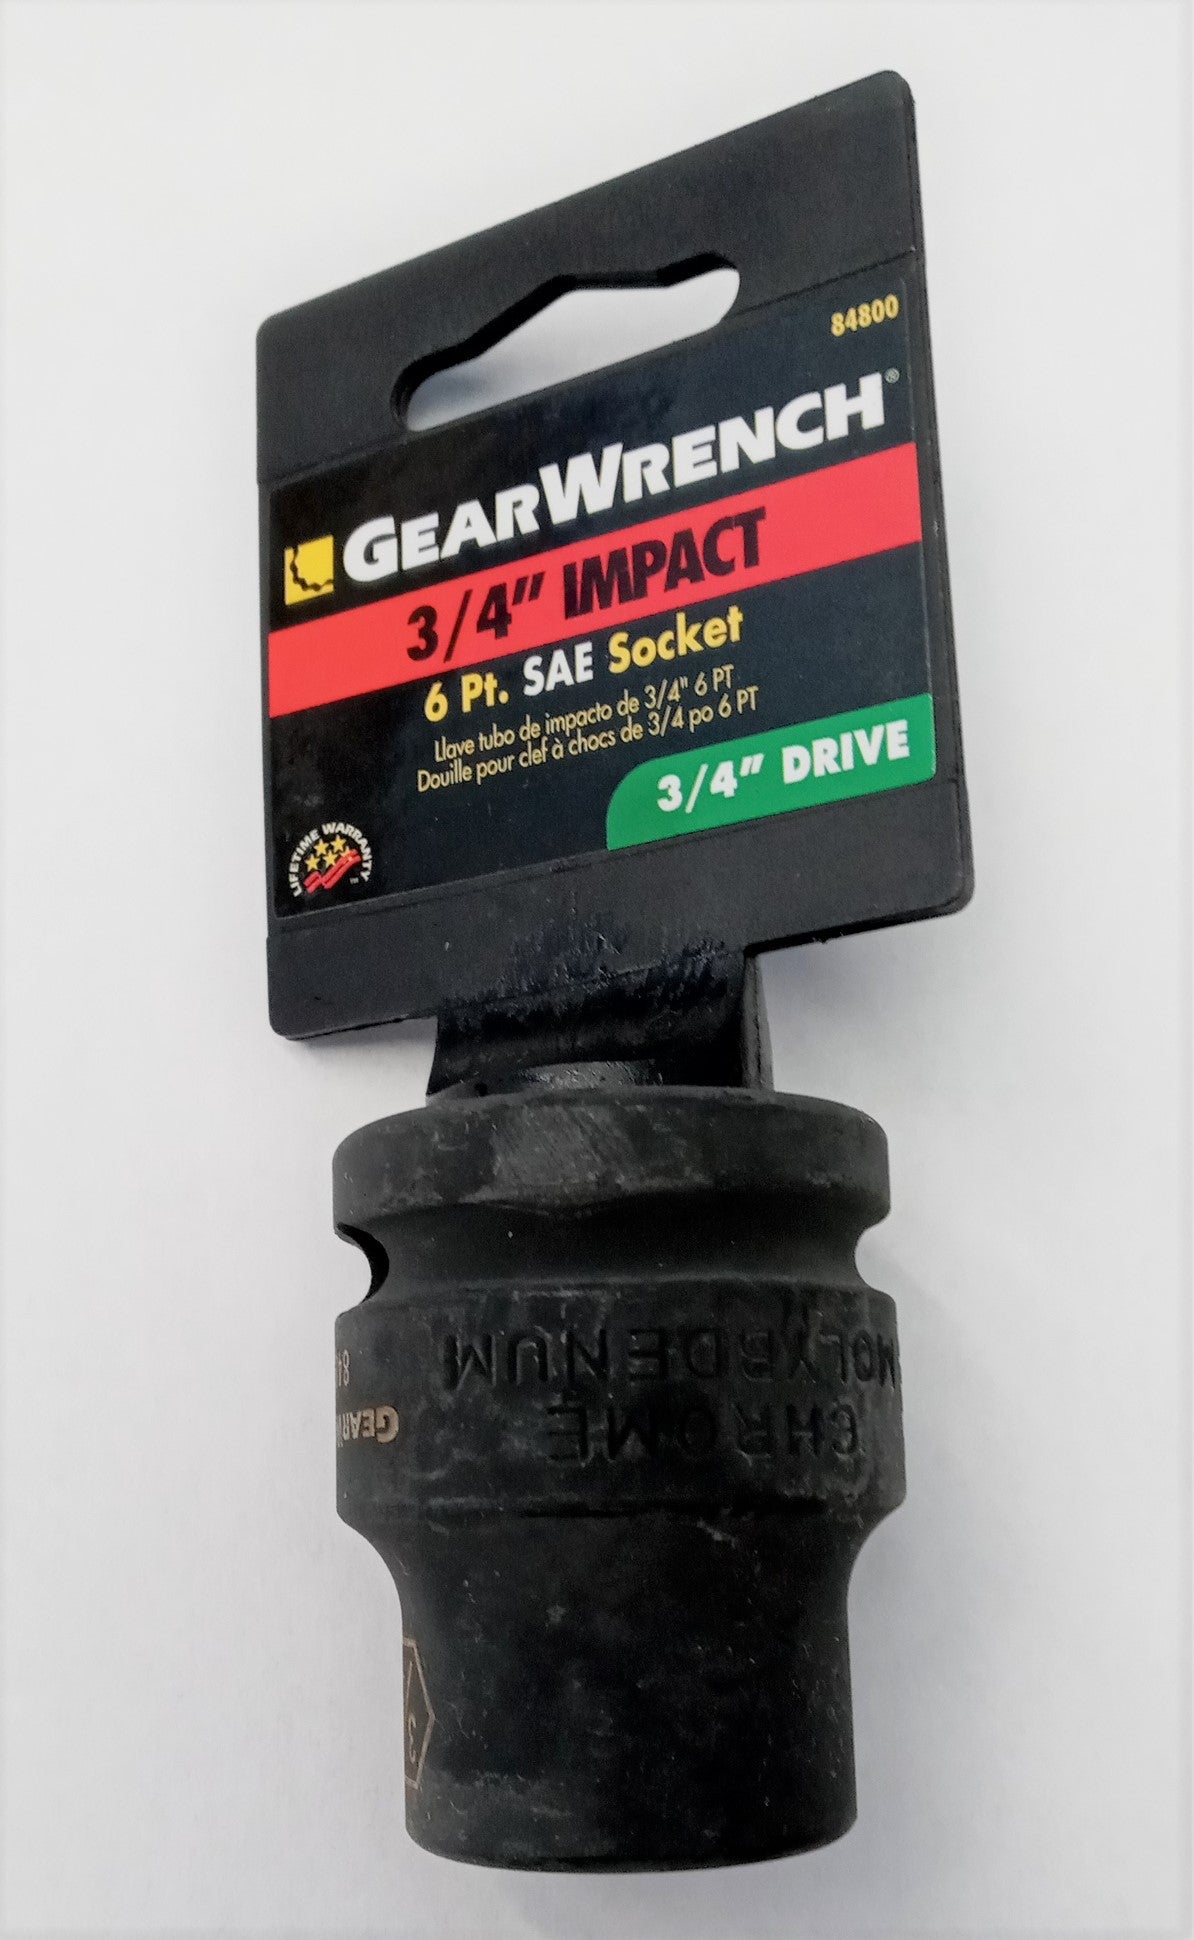 Gearwrench 84800 3/4" Drive 6 Point Standard Impact SAE Socket 3/4"